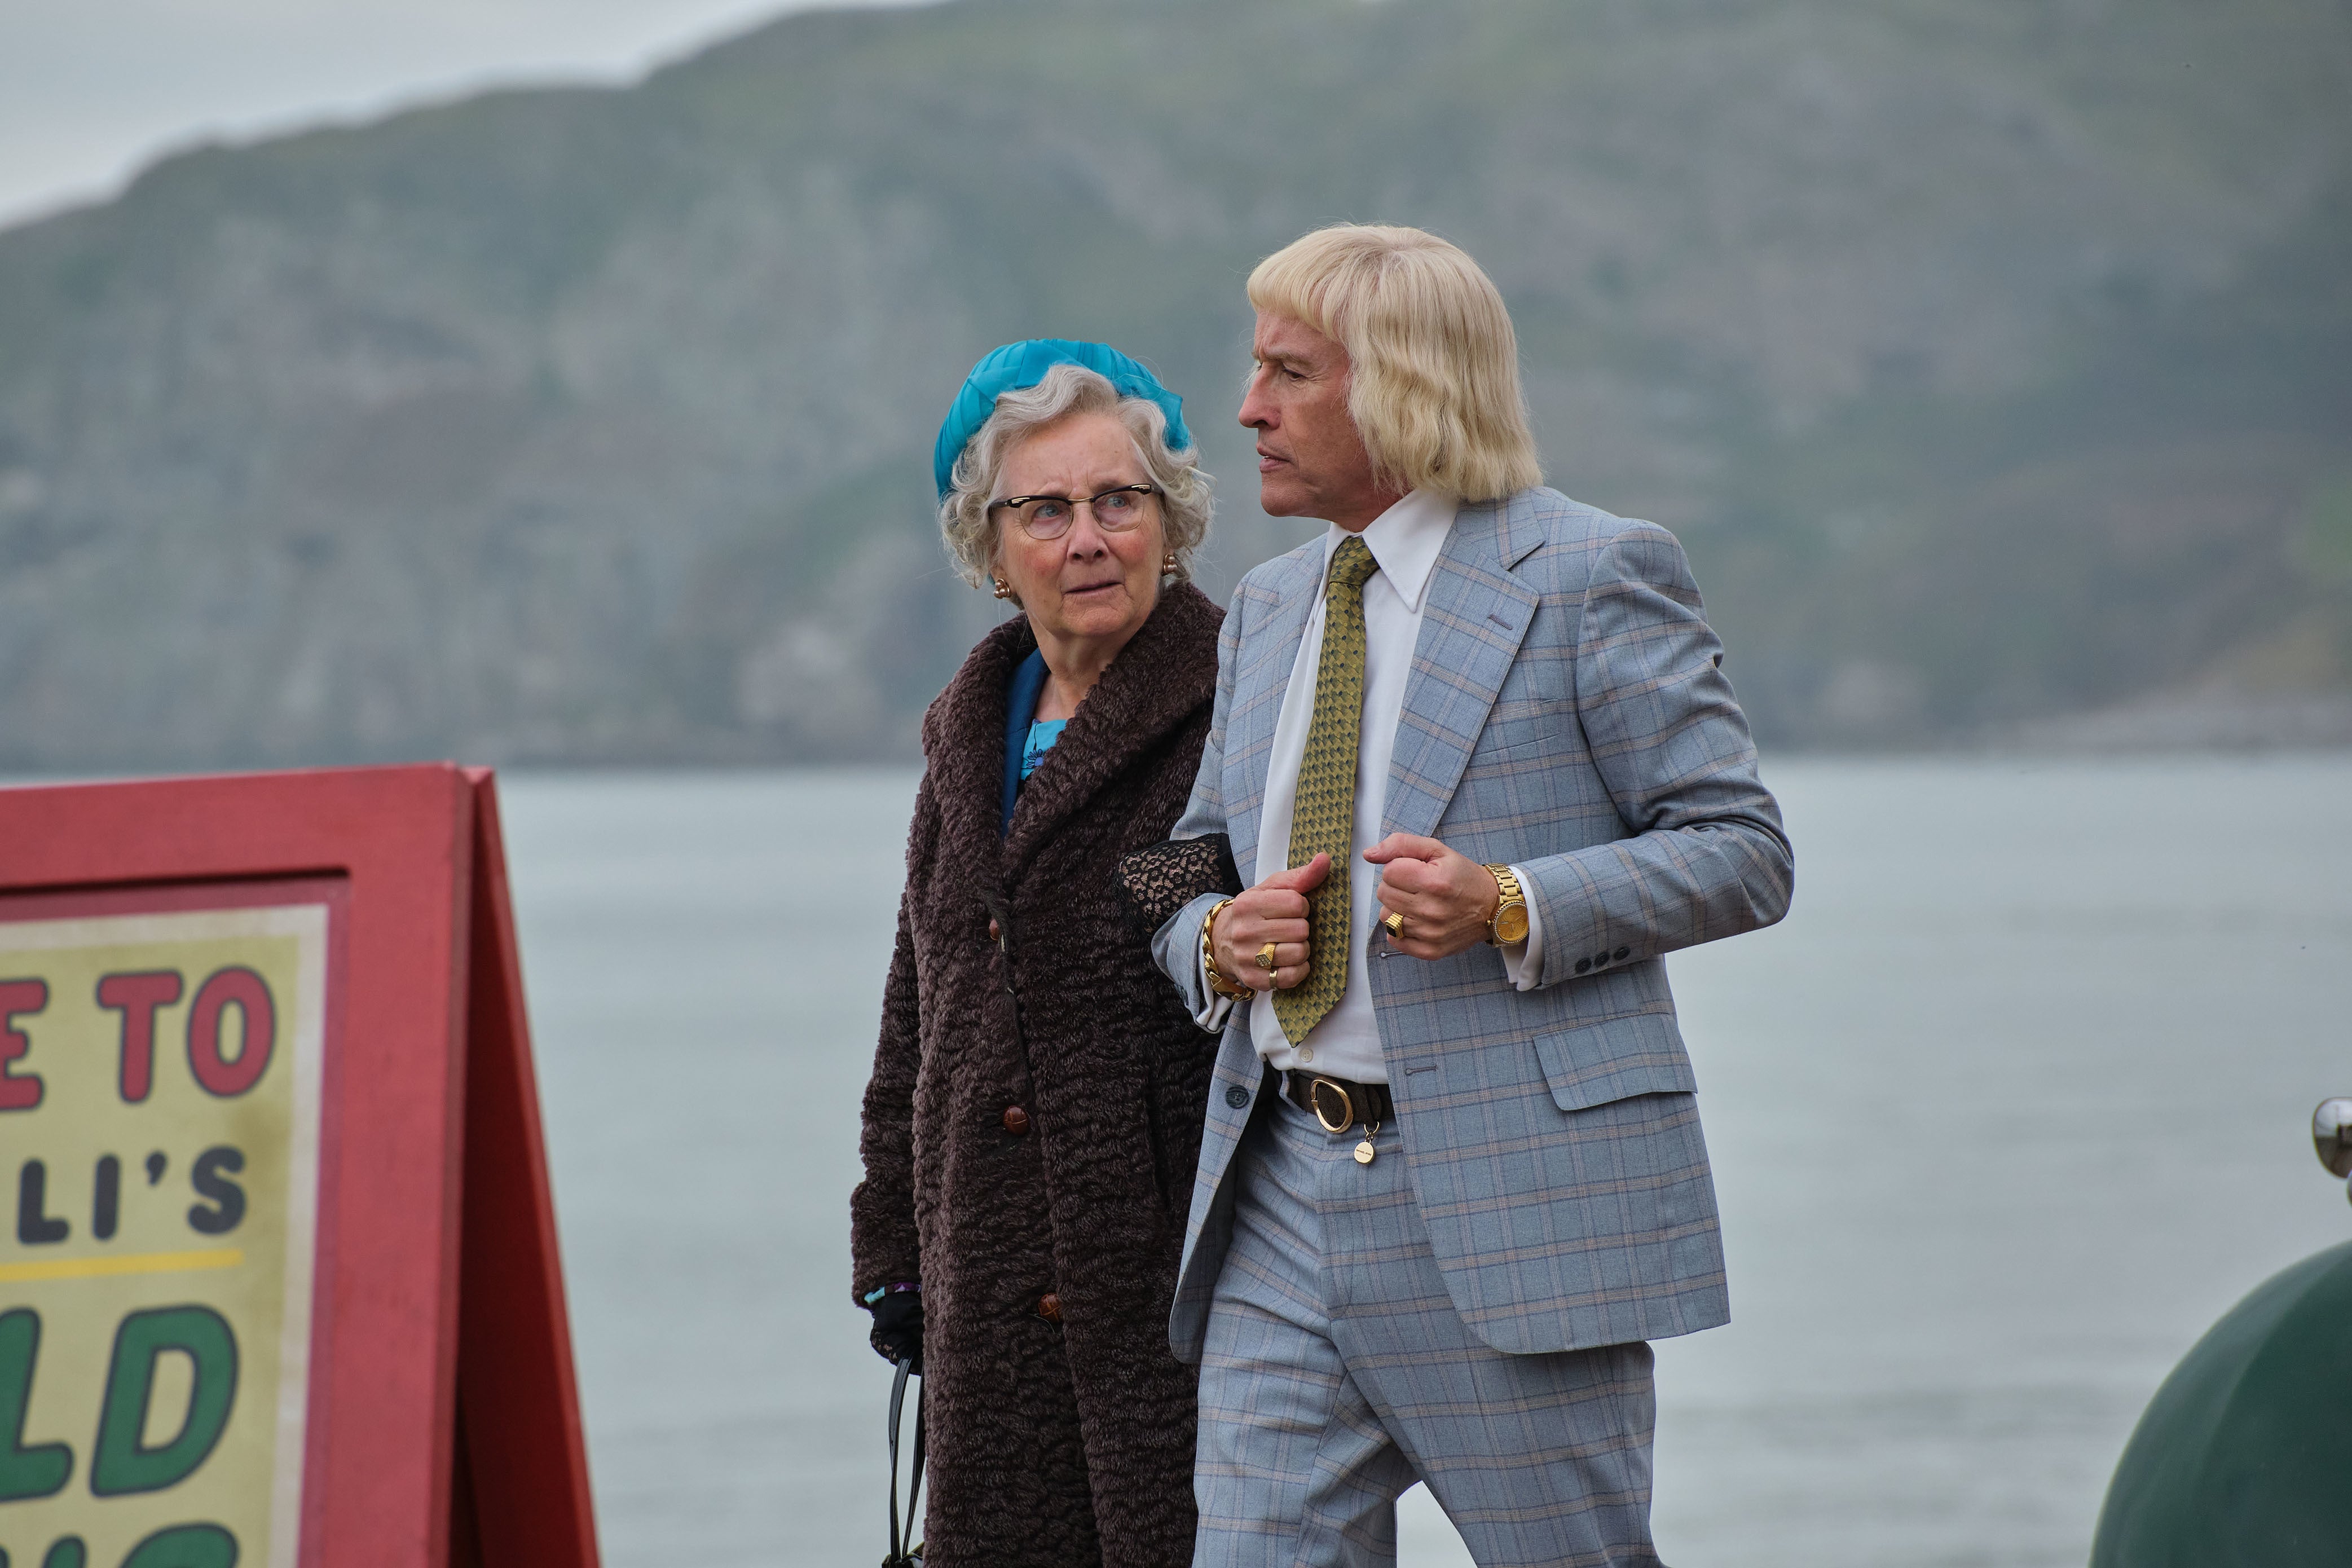 Gemma Jones and Steve Coogan as Agnes and Jimmy Savile taking a walk in Scarborough